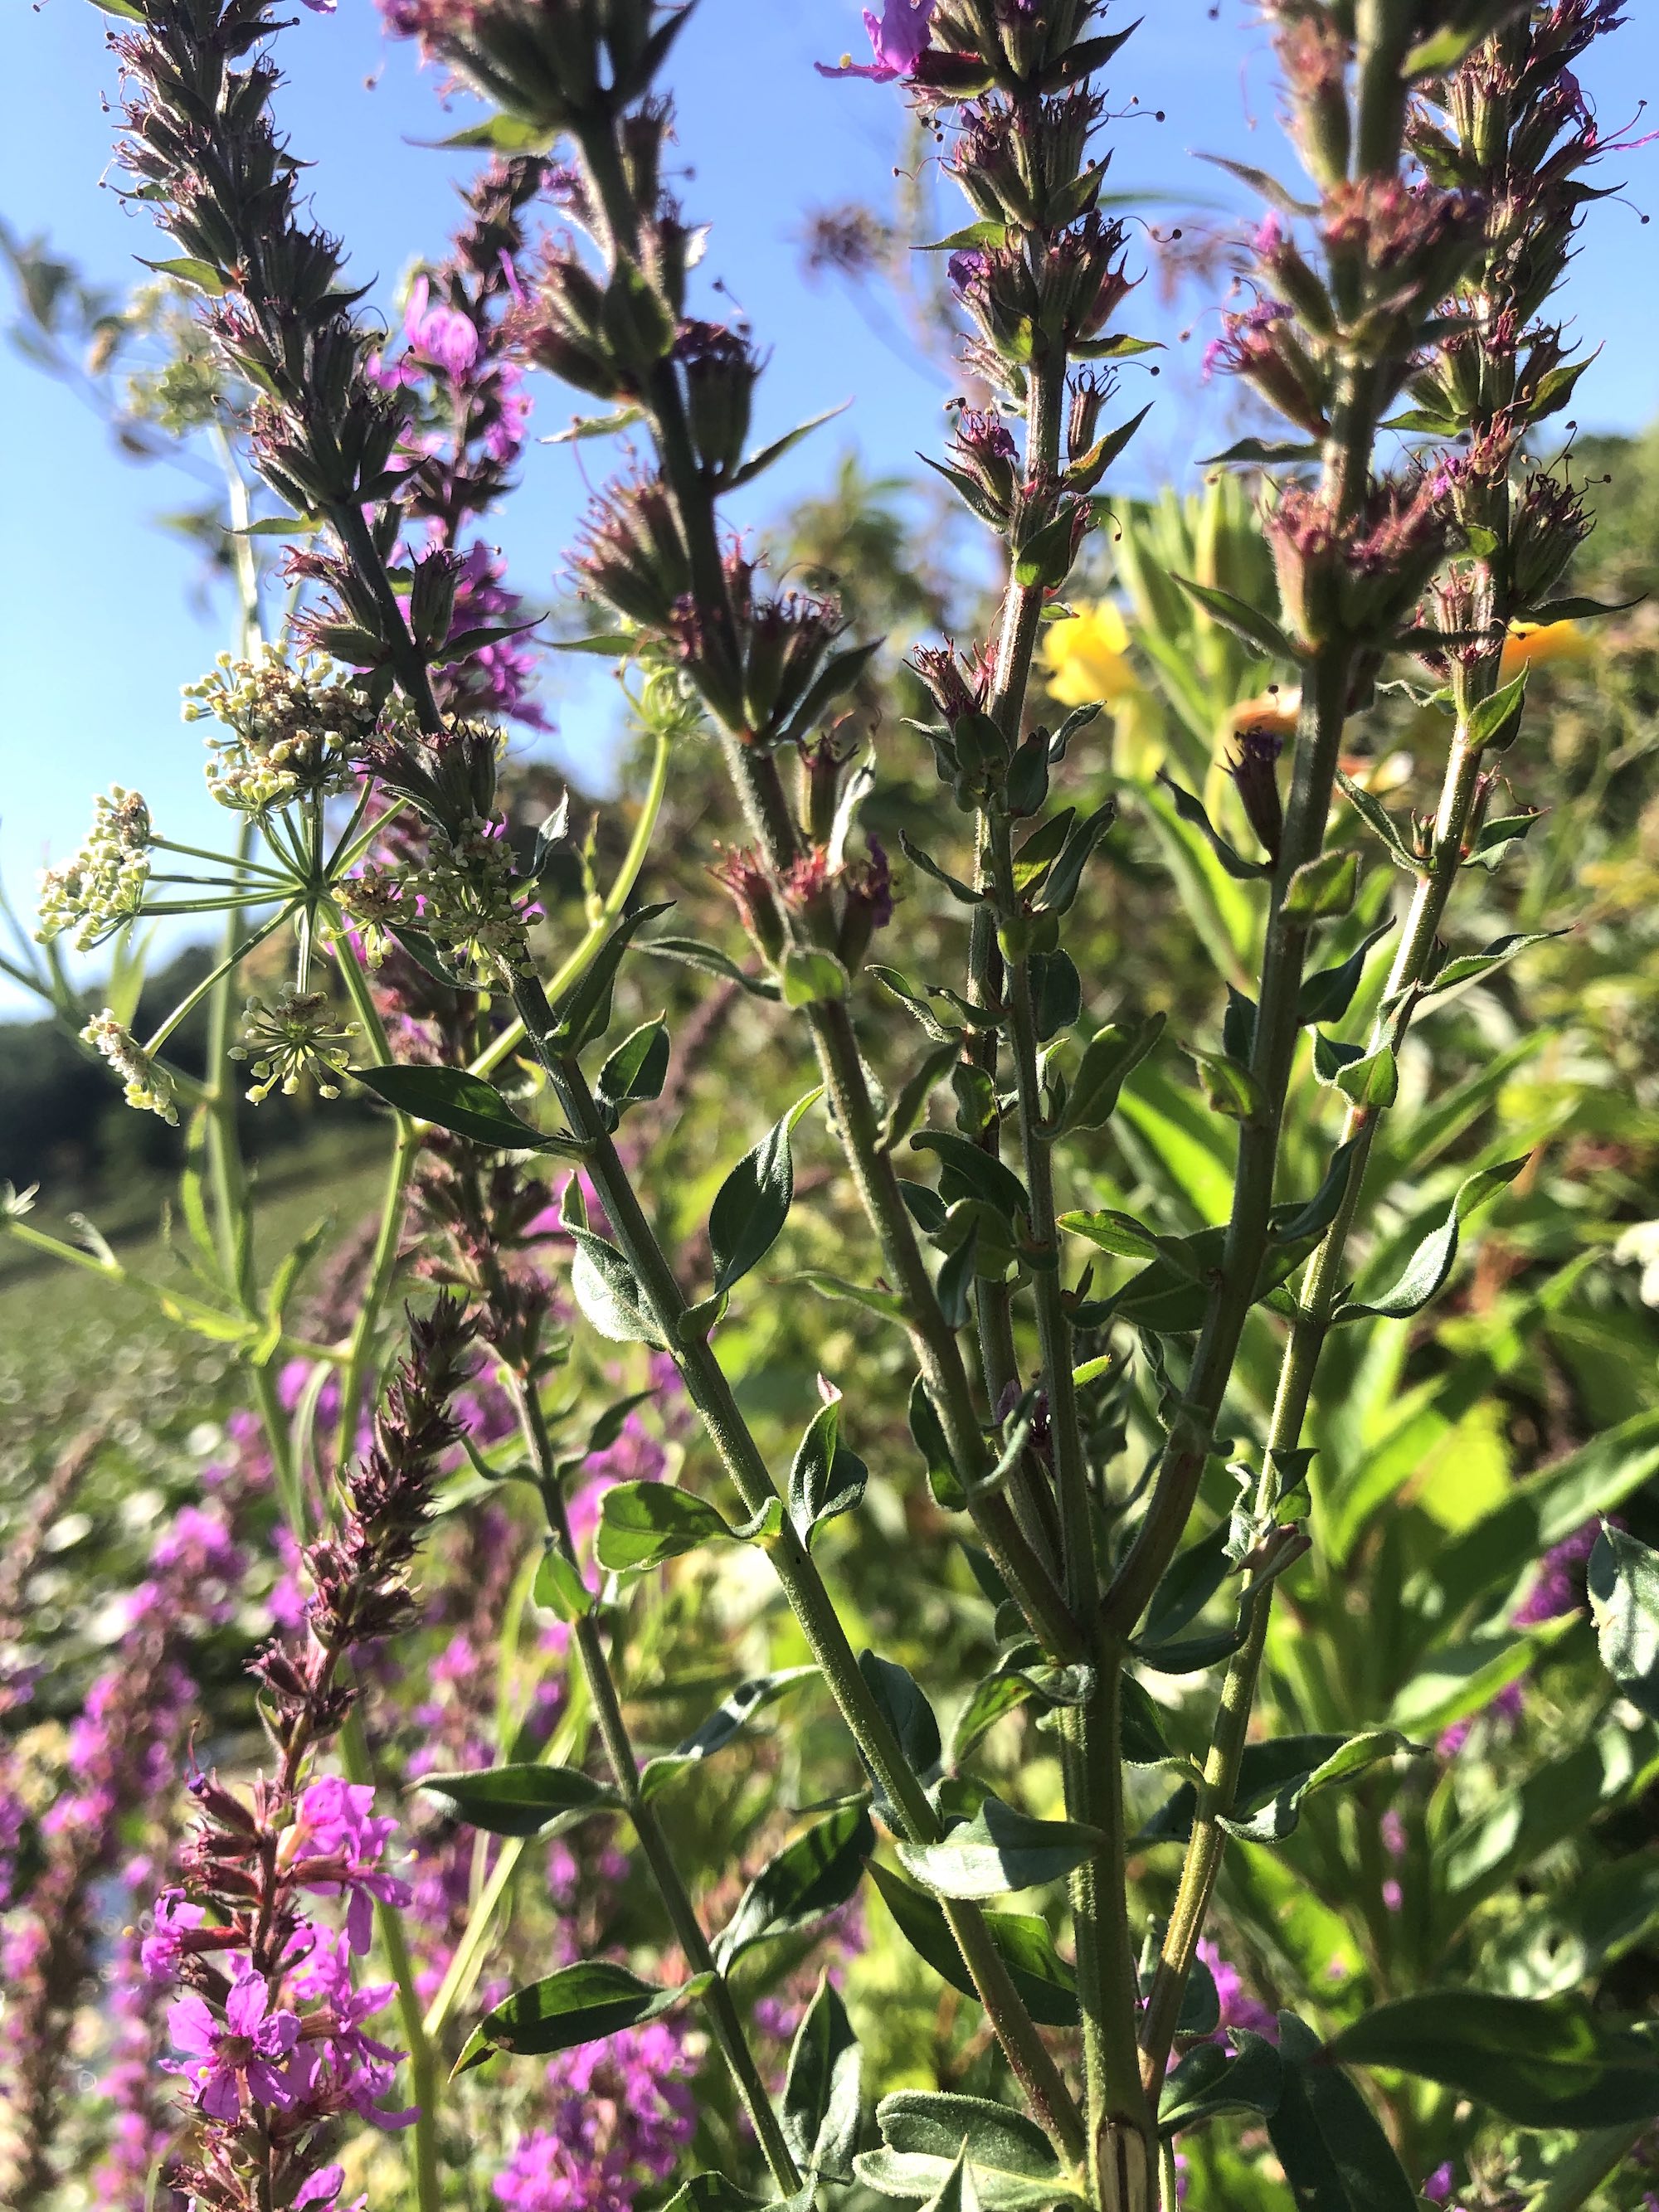 Leaves of Purple Loosestrife stalk and leaves along shore of Lake Wingra in Wingra Park on August 21, 2020.